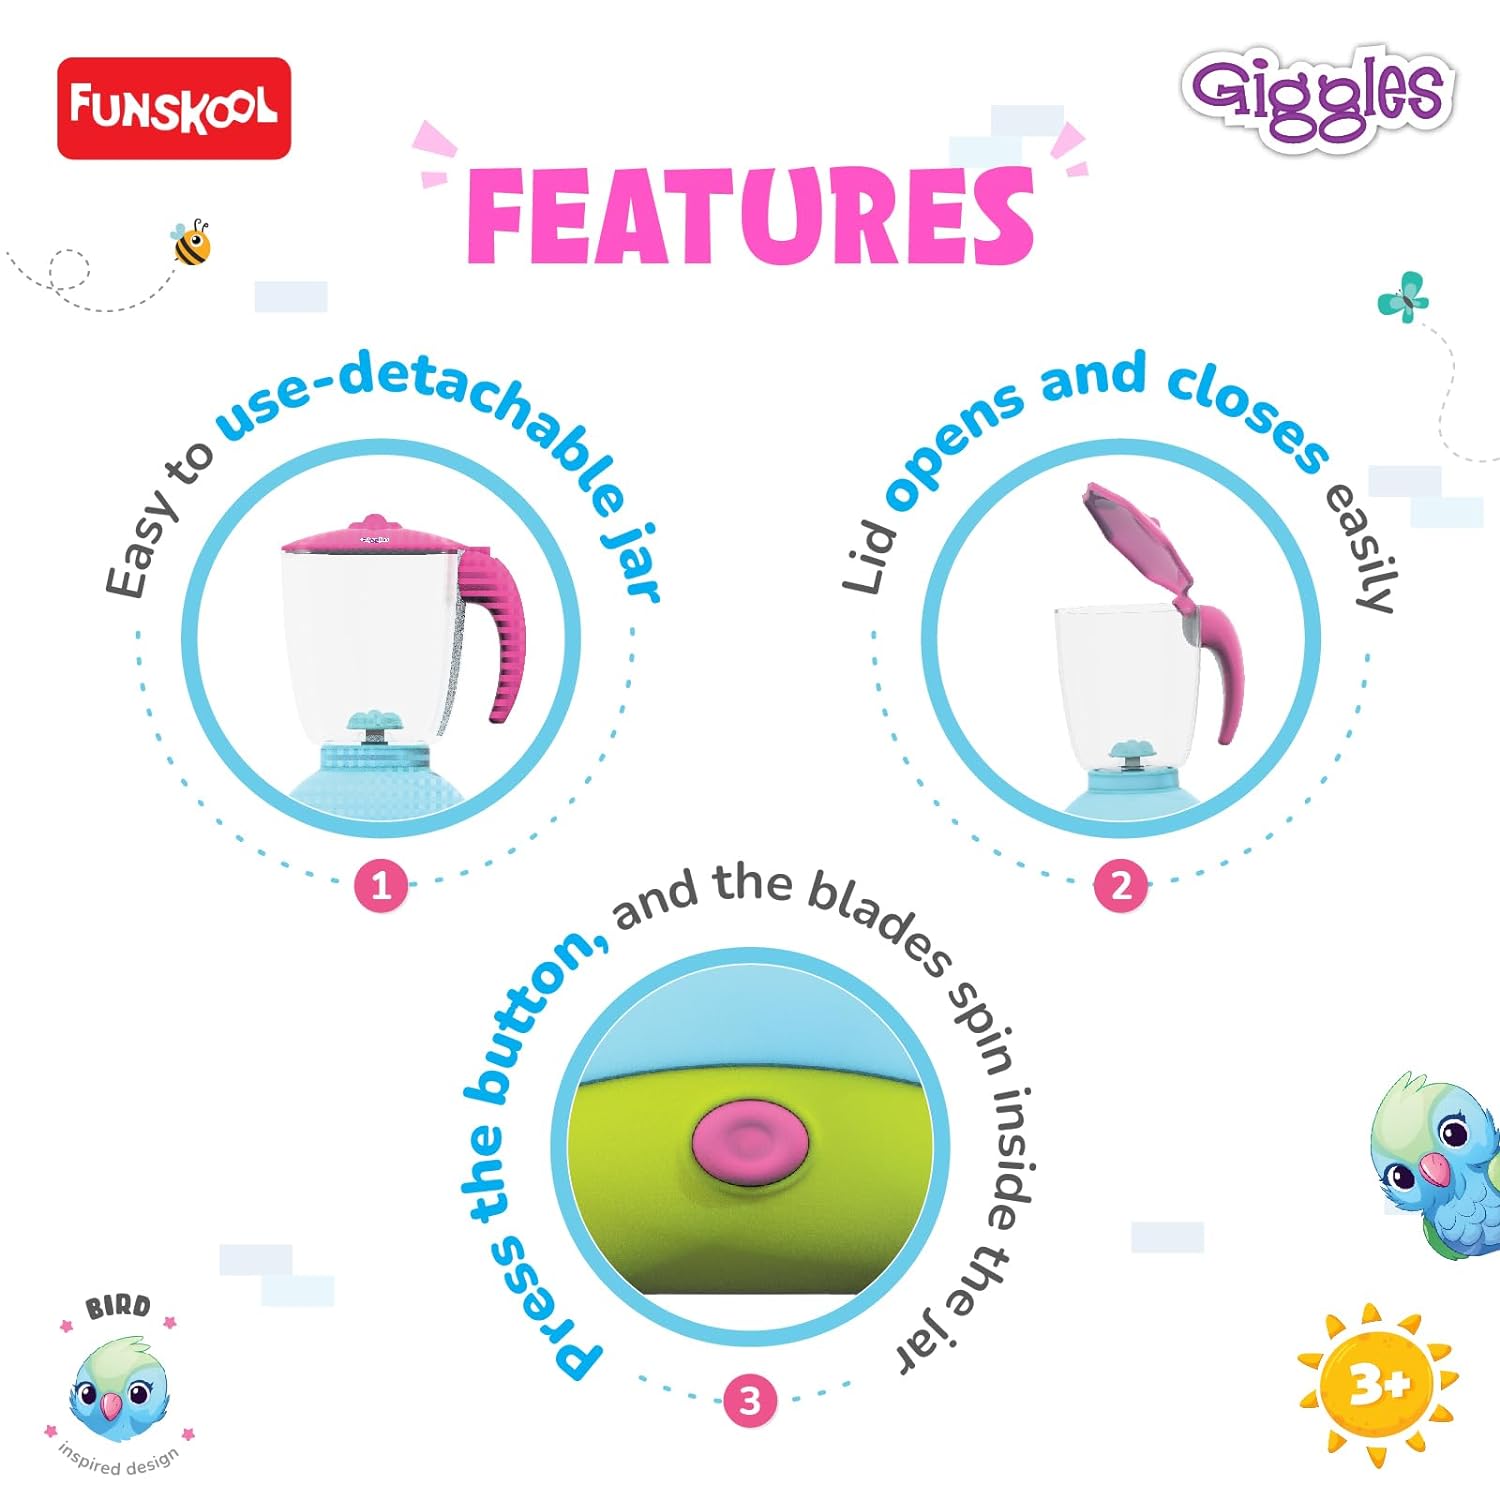 Funskool Giggles Playset Happy Lil Home-Juicer, Bird Inspired Pretend Role-Play Toy with Electronic Sounds,Mixer Blade,for Kids 3 Year Old & Above